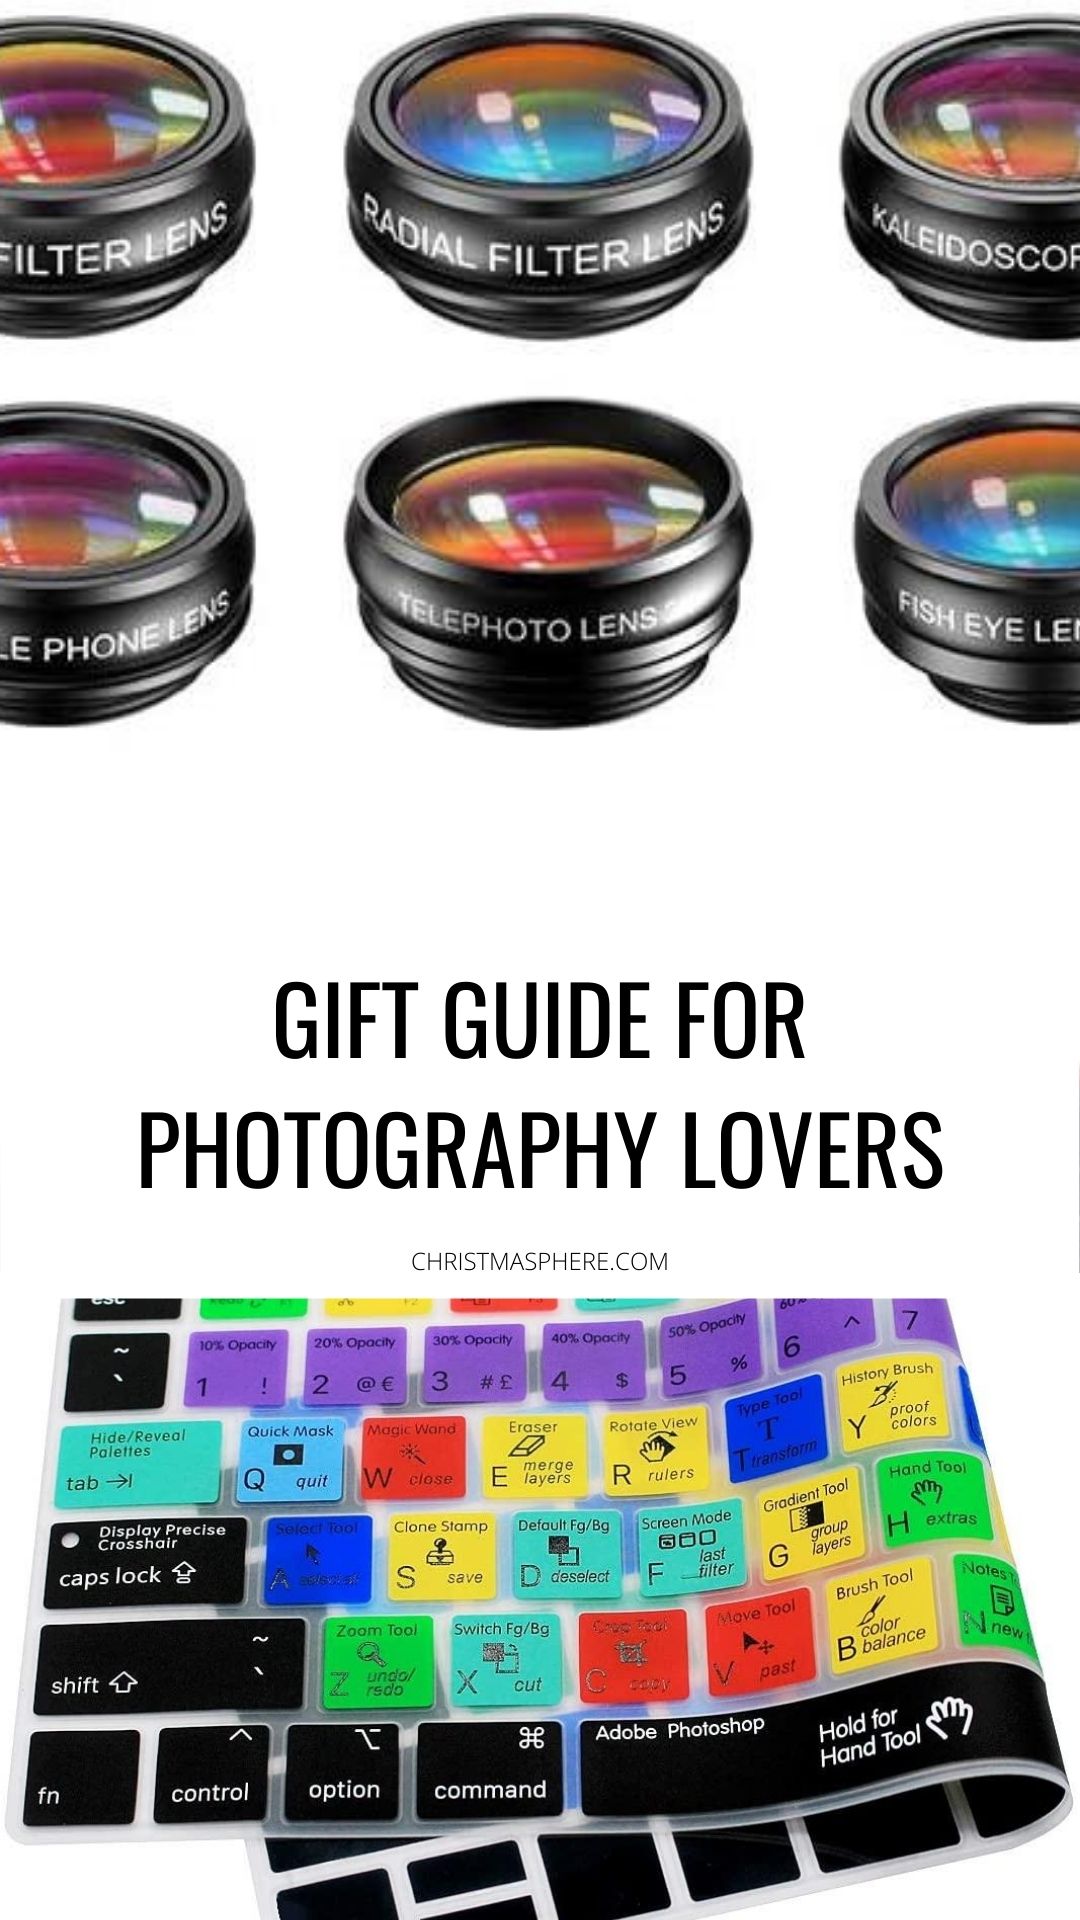 Gift guide for photography lovers